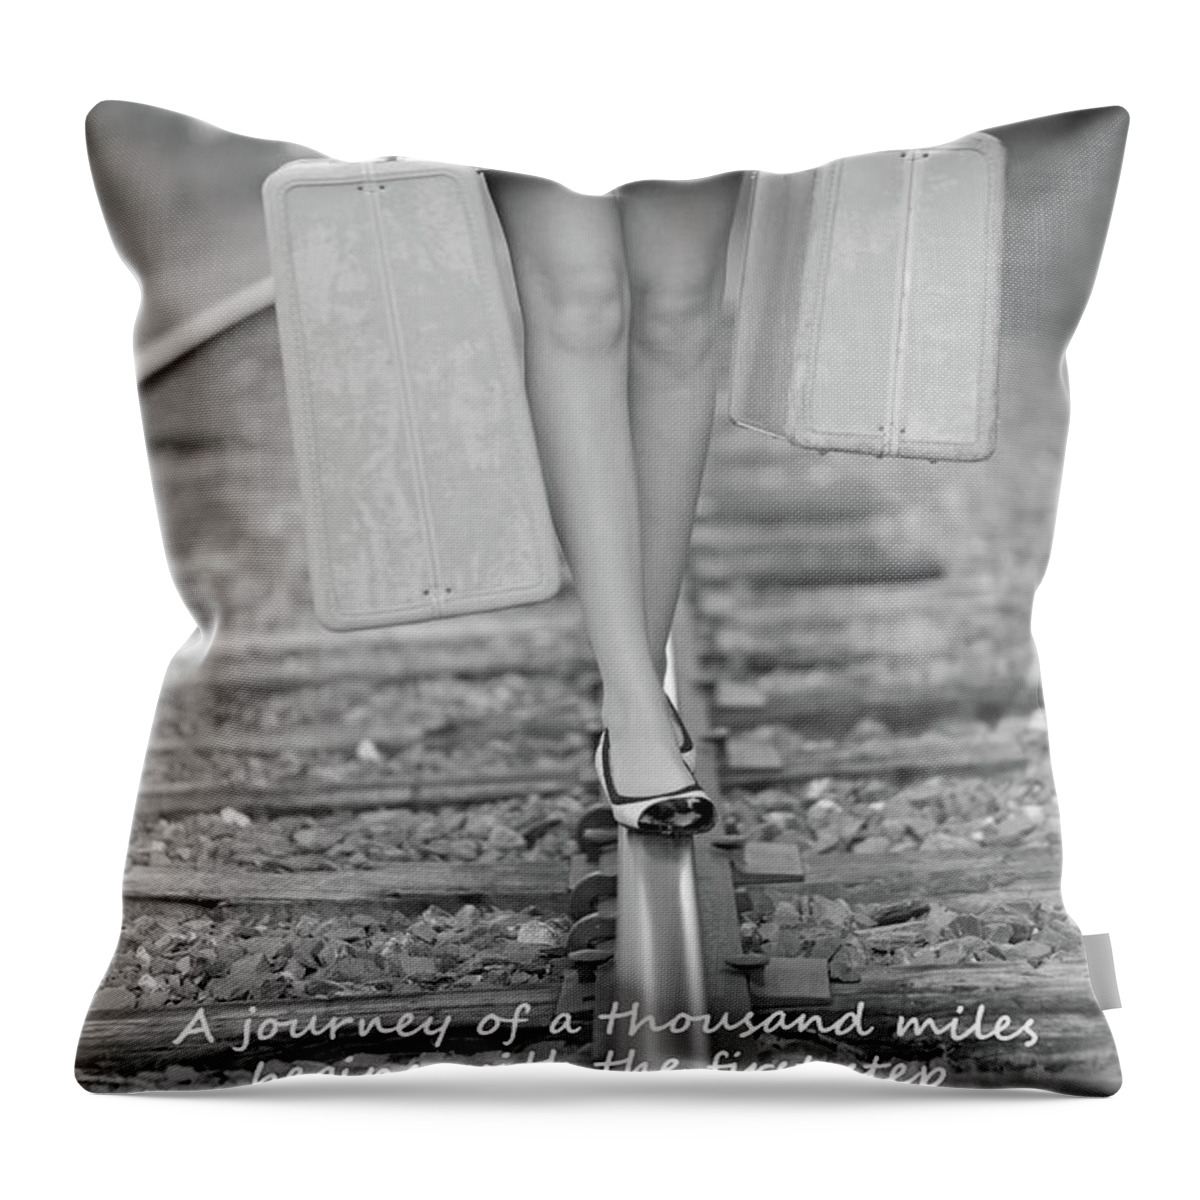 A Journey Of A Thousand Miles Begins With The First Step Throw Pillow featuring the photograph First Step by Barbara West